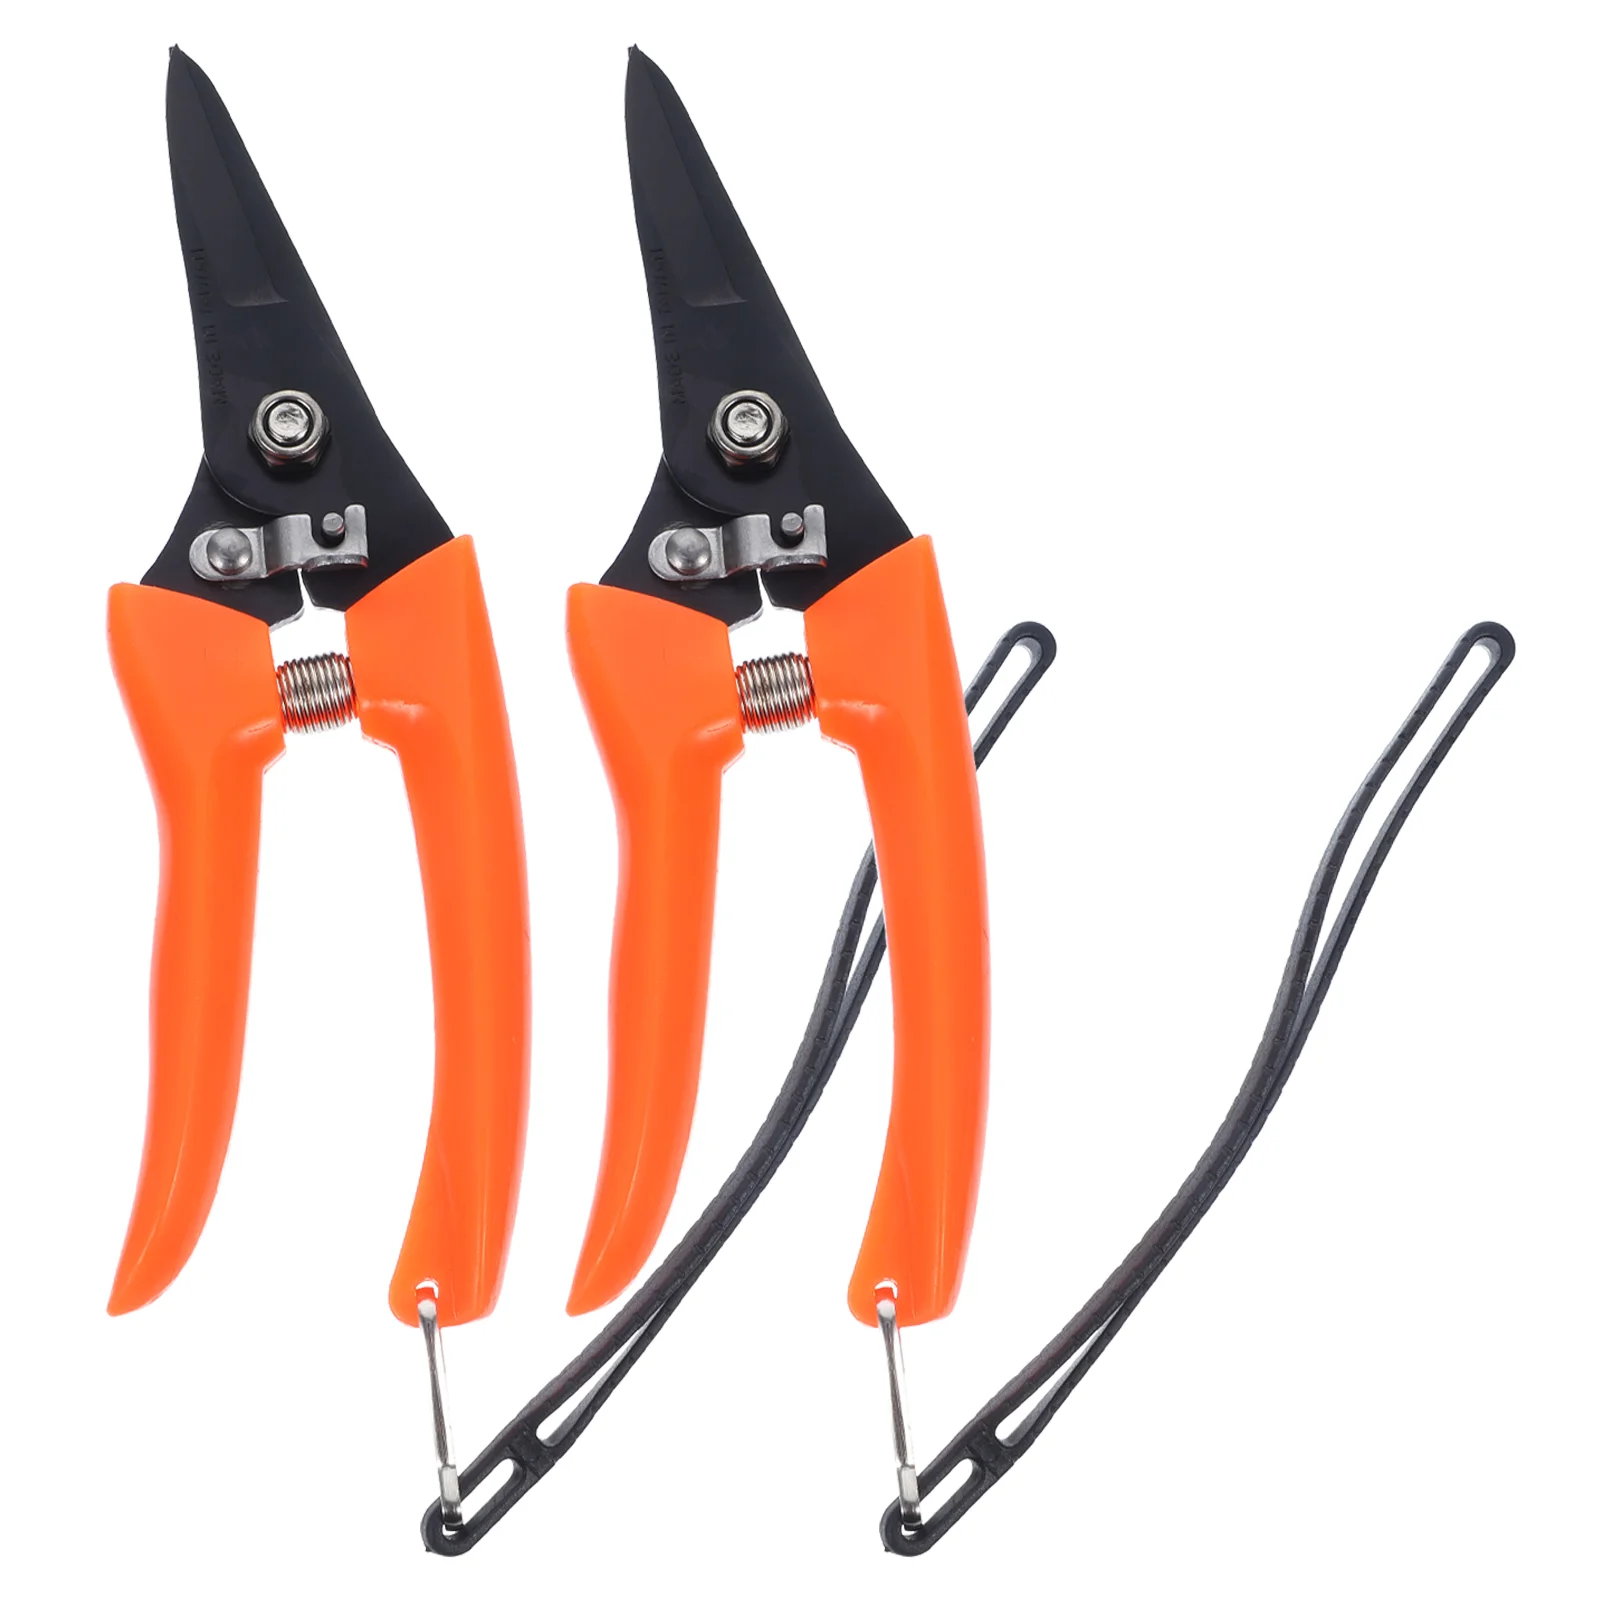 

Hoof Trimmer Shears Trimming Garden Clippers Gardening Goat Trimmers Nail Tools Pruning Floral Scissors Sheep Shear Rot Shrub